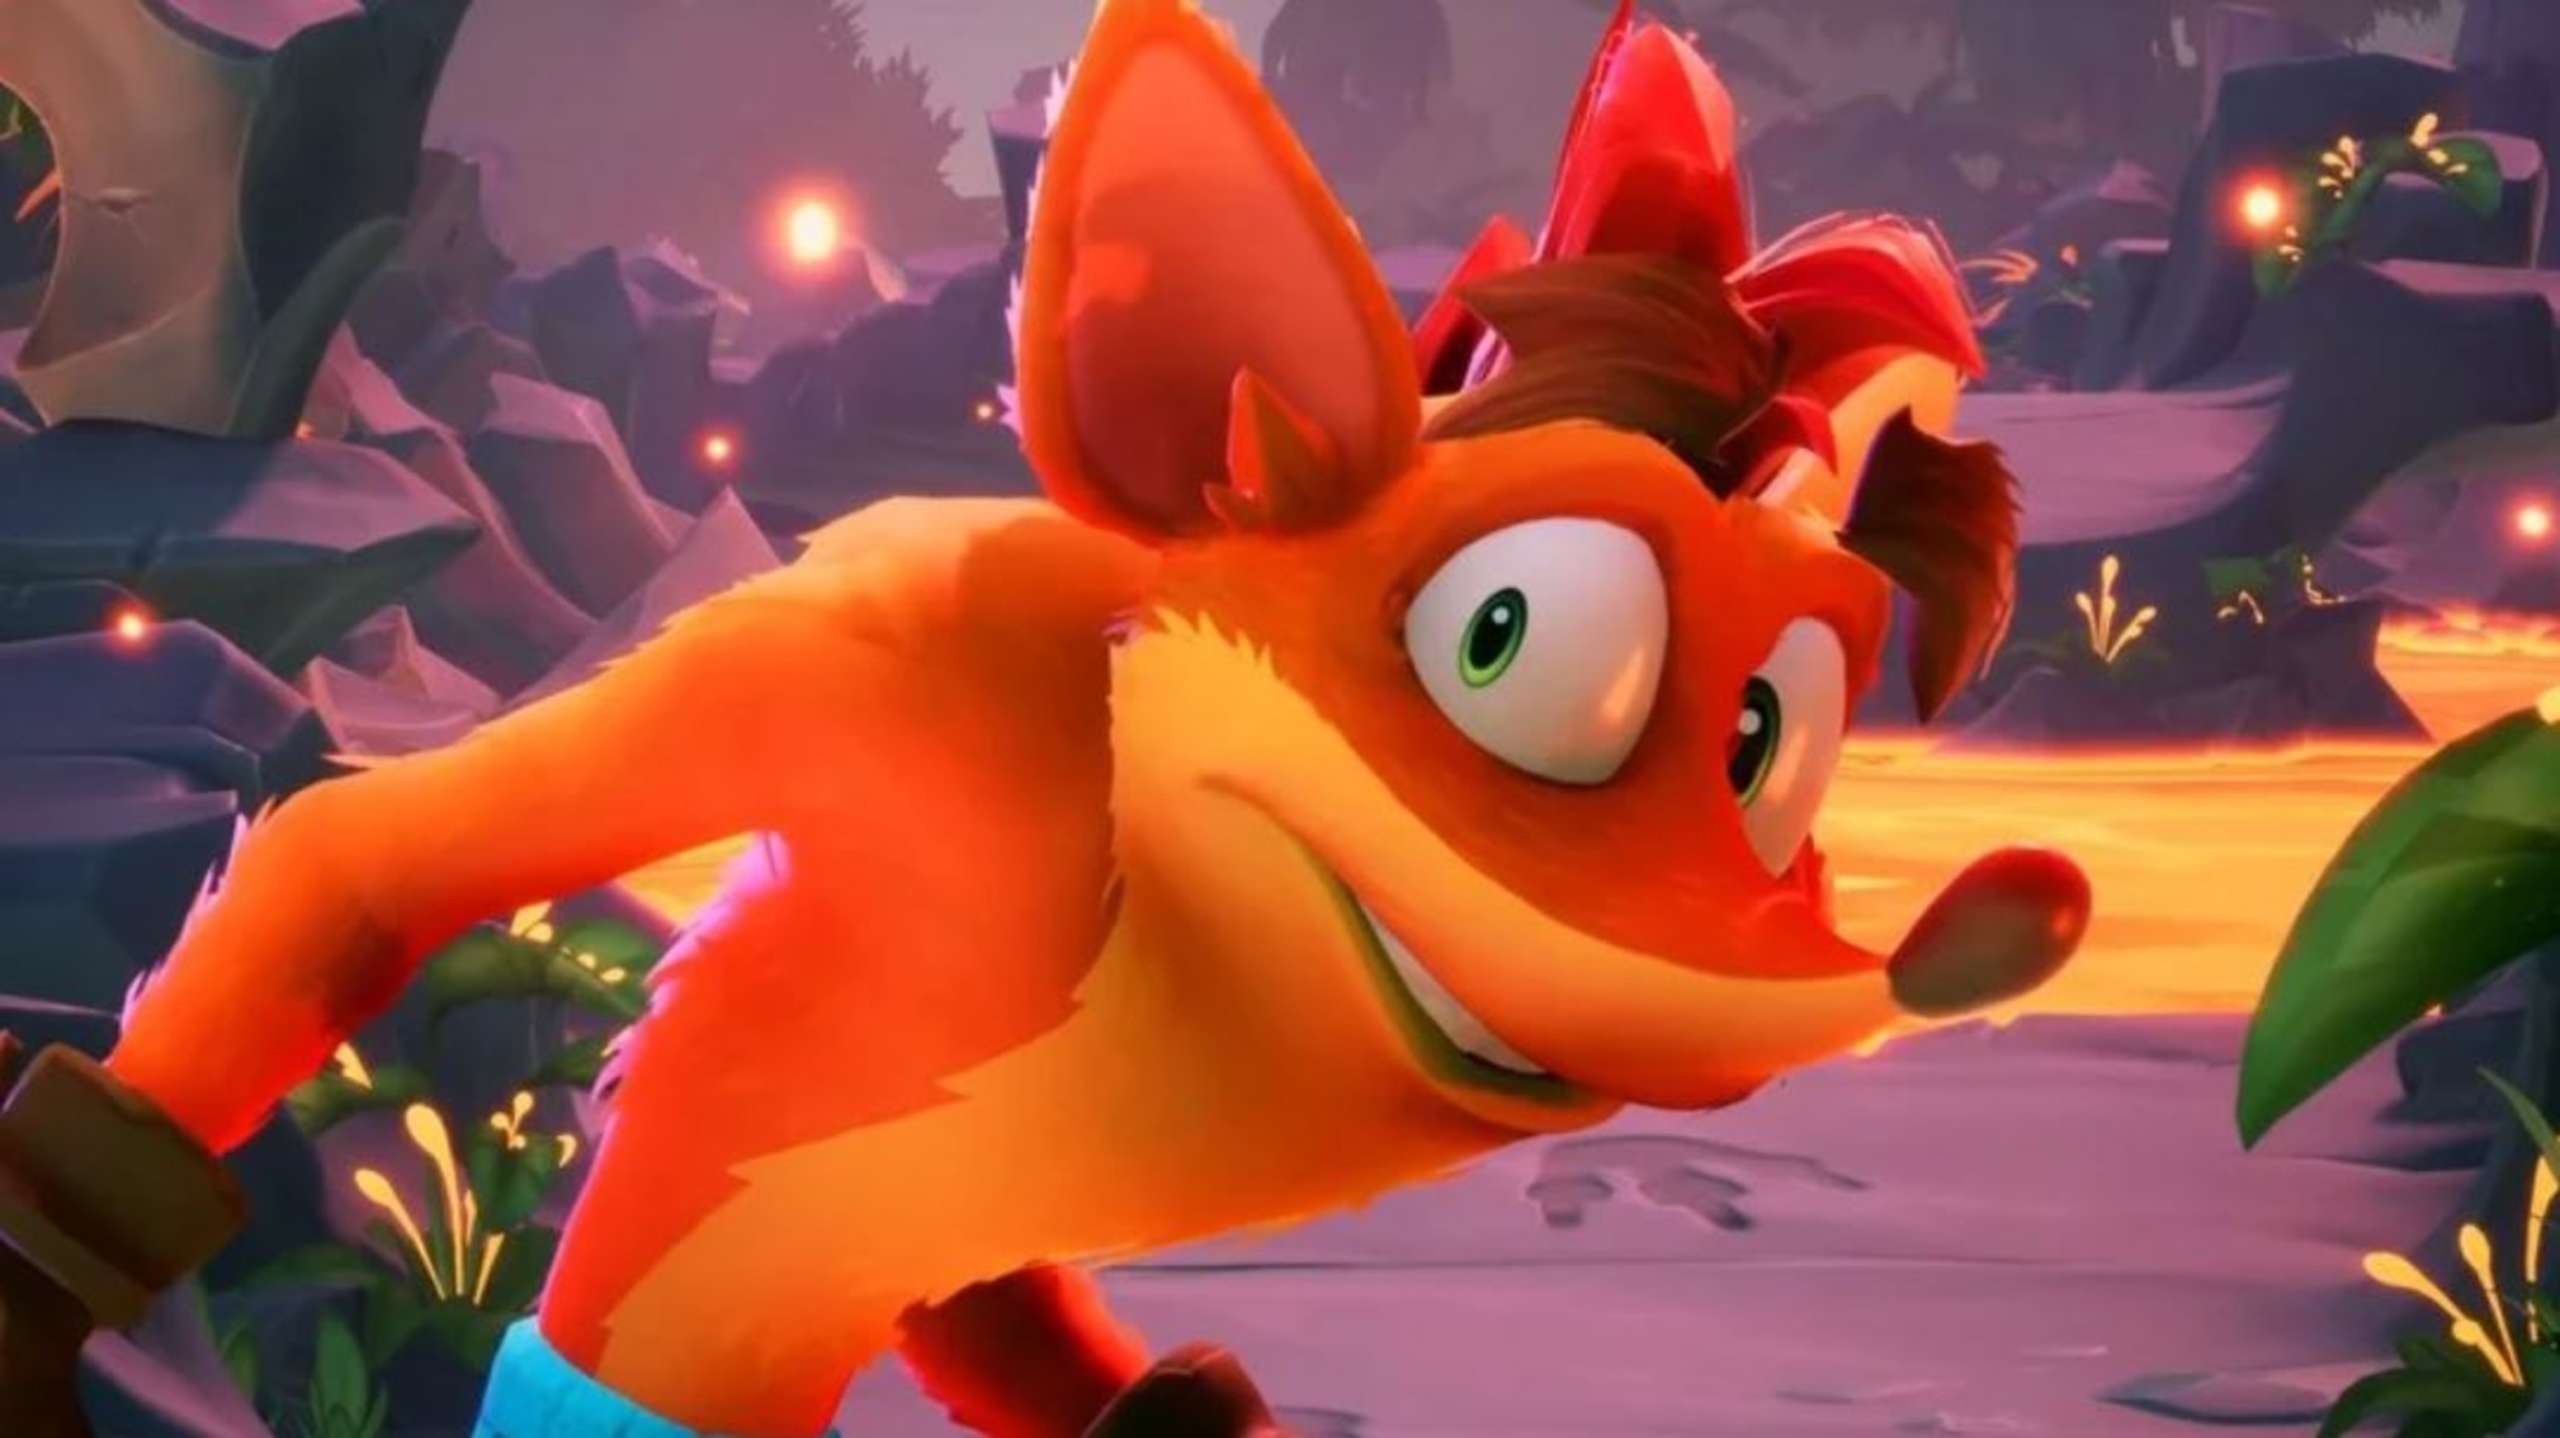 Activision Has Hinted At A Crash Bandicoot Statement At This Year’s The Game Awards Ceremony, Scheduled For The First Week Of December